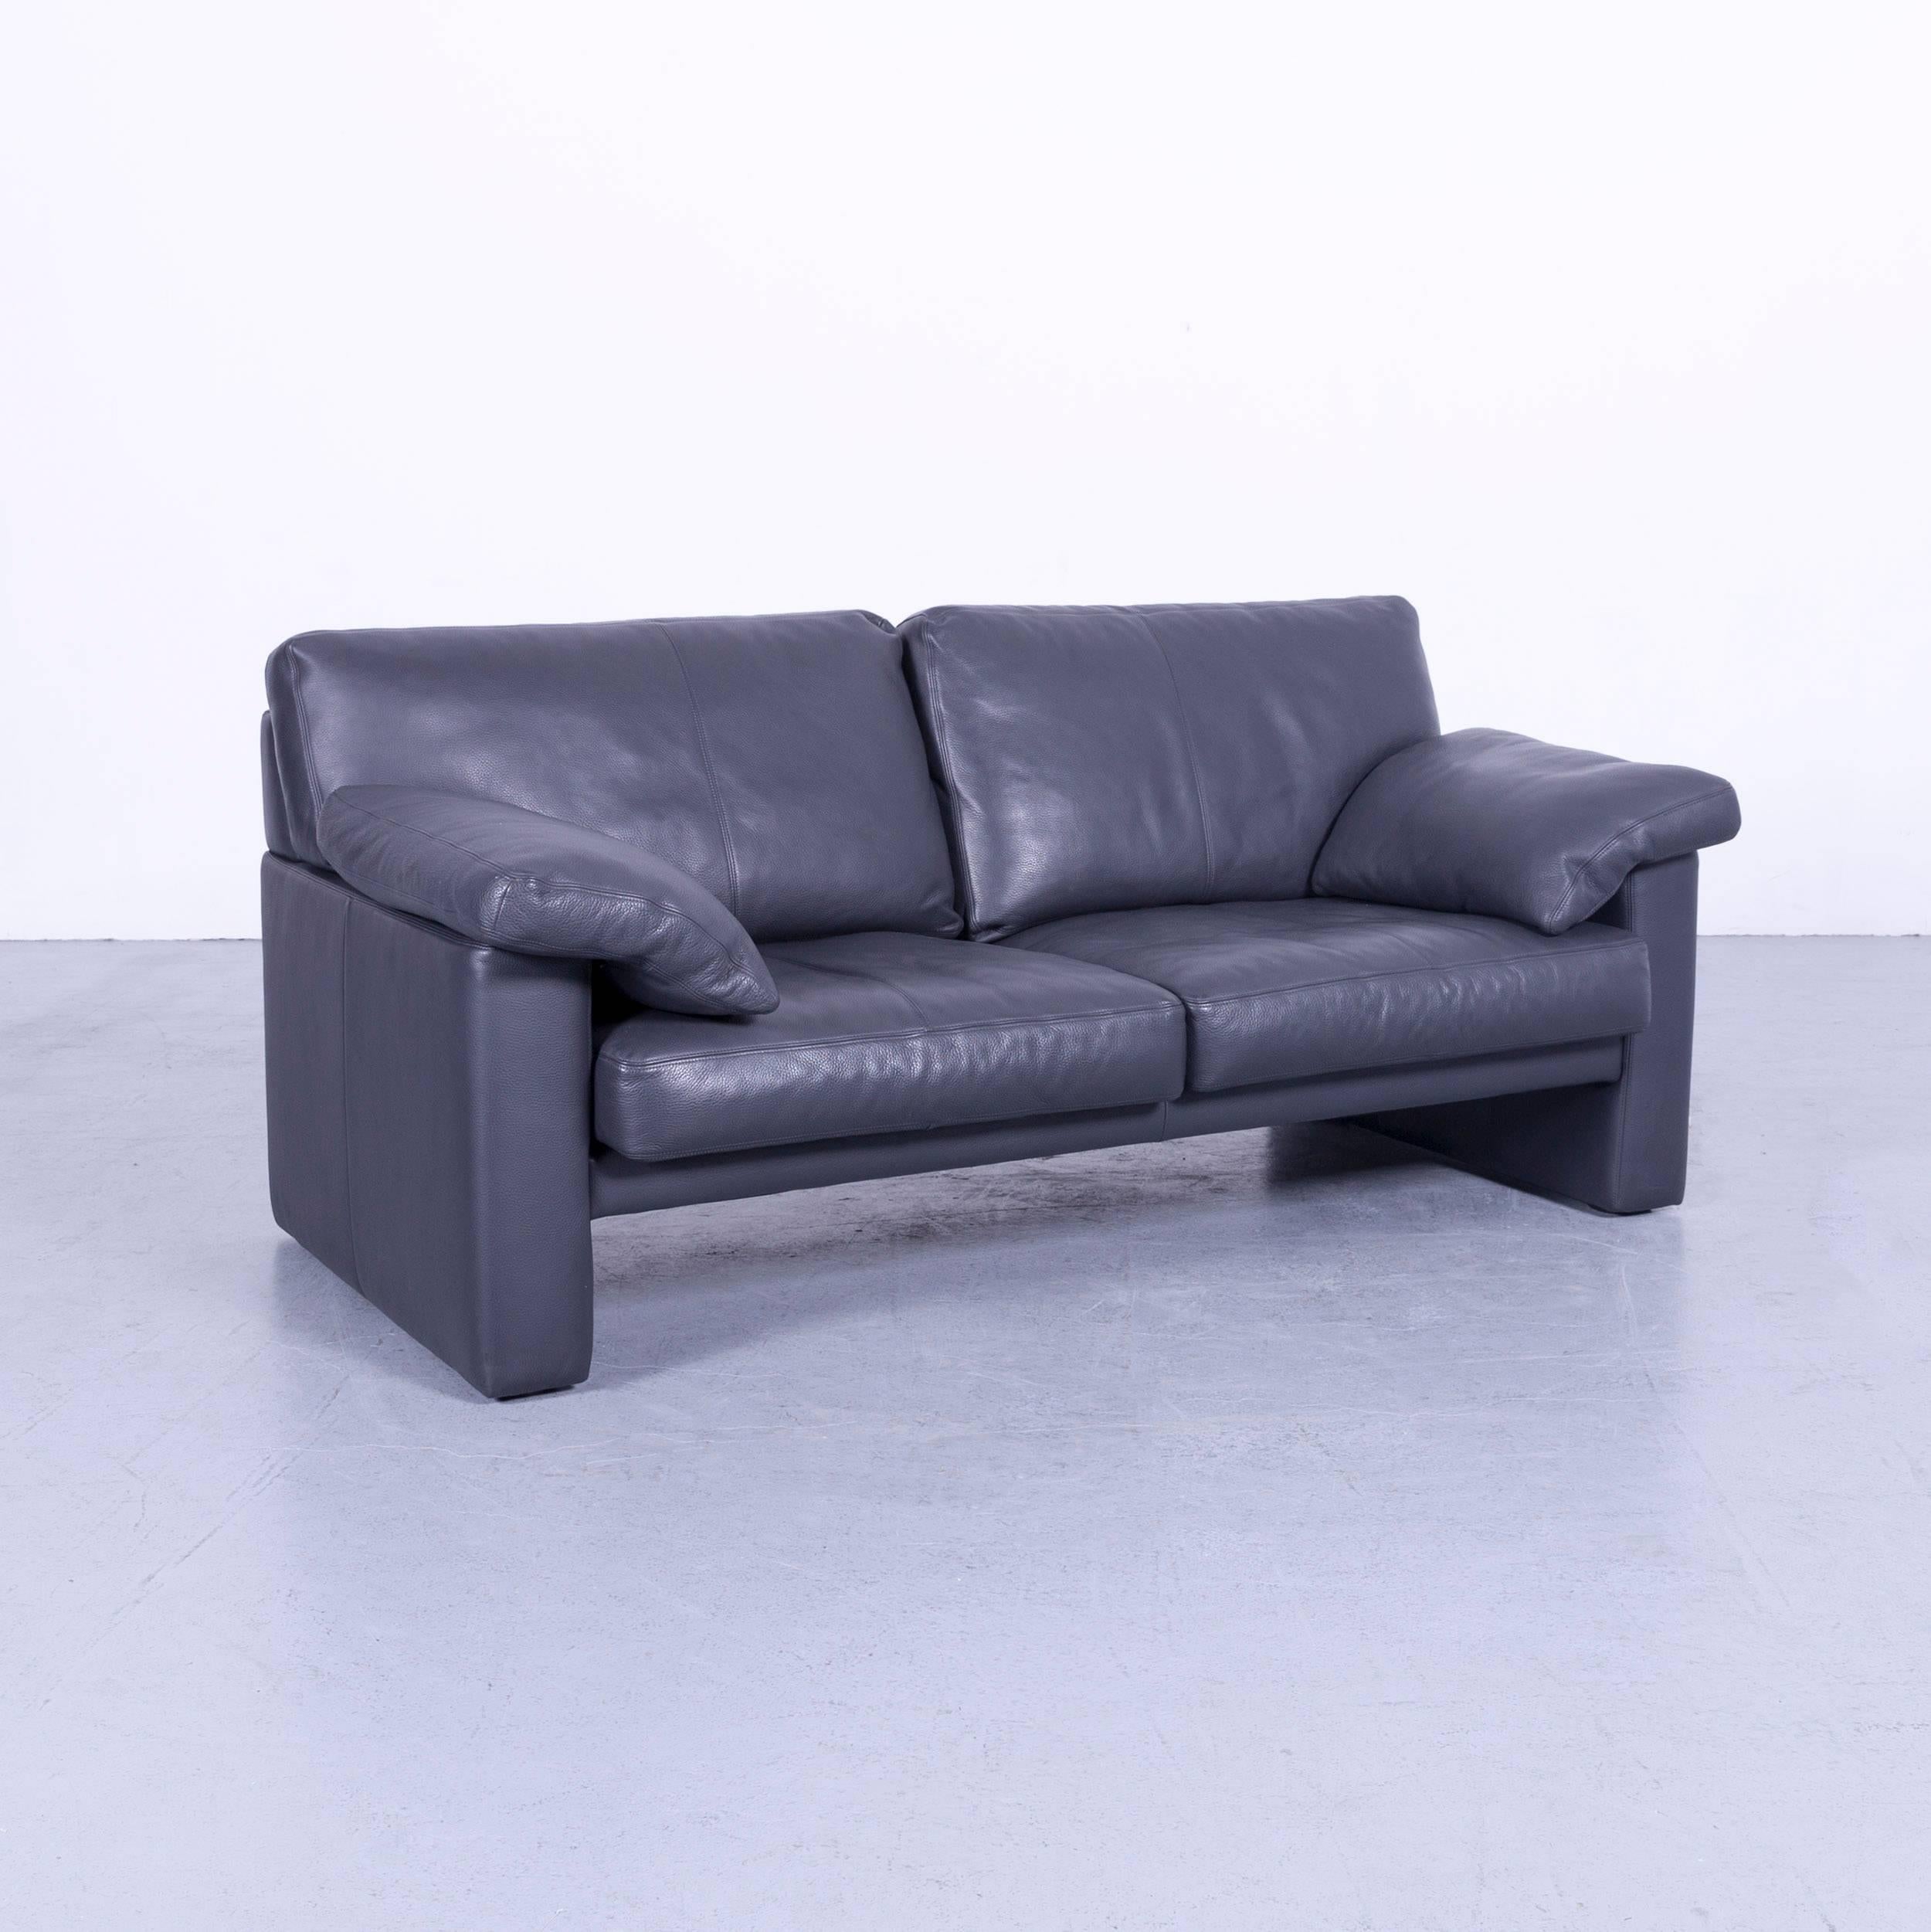 We bring to you an Erpo CL 300 leather sofa grey two-seat couch.

































